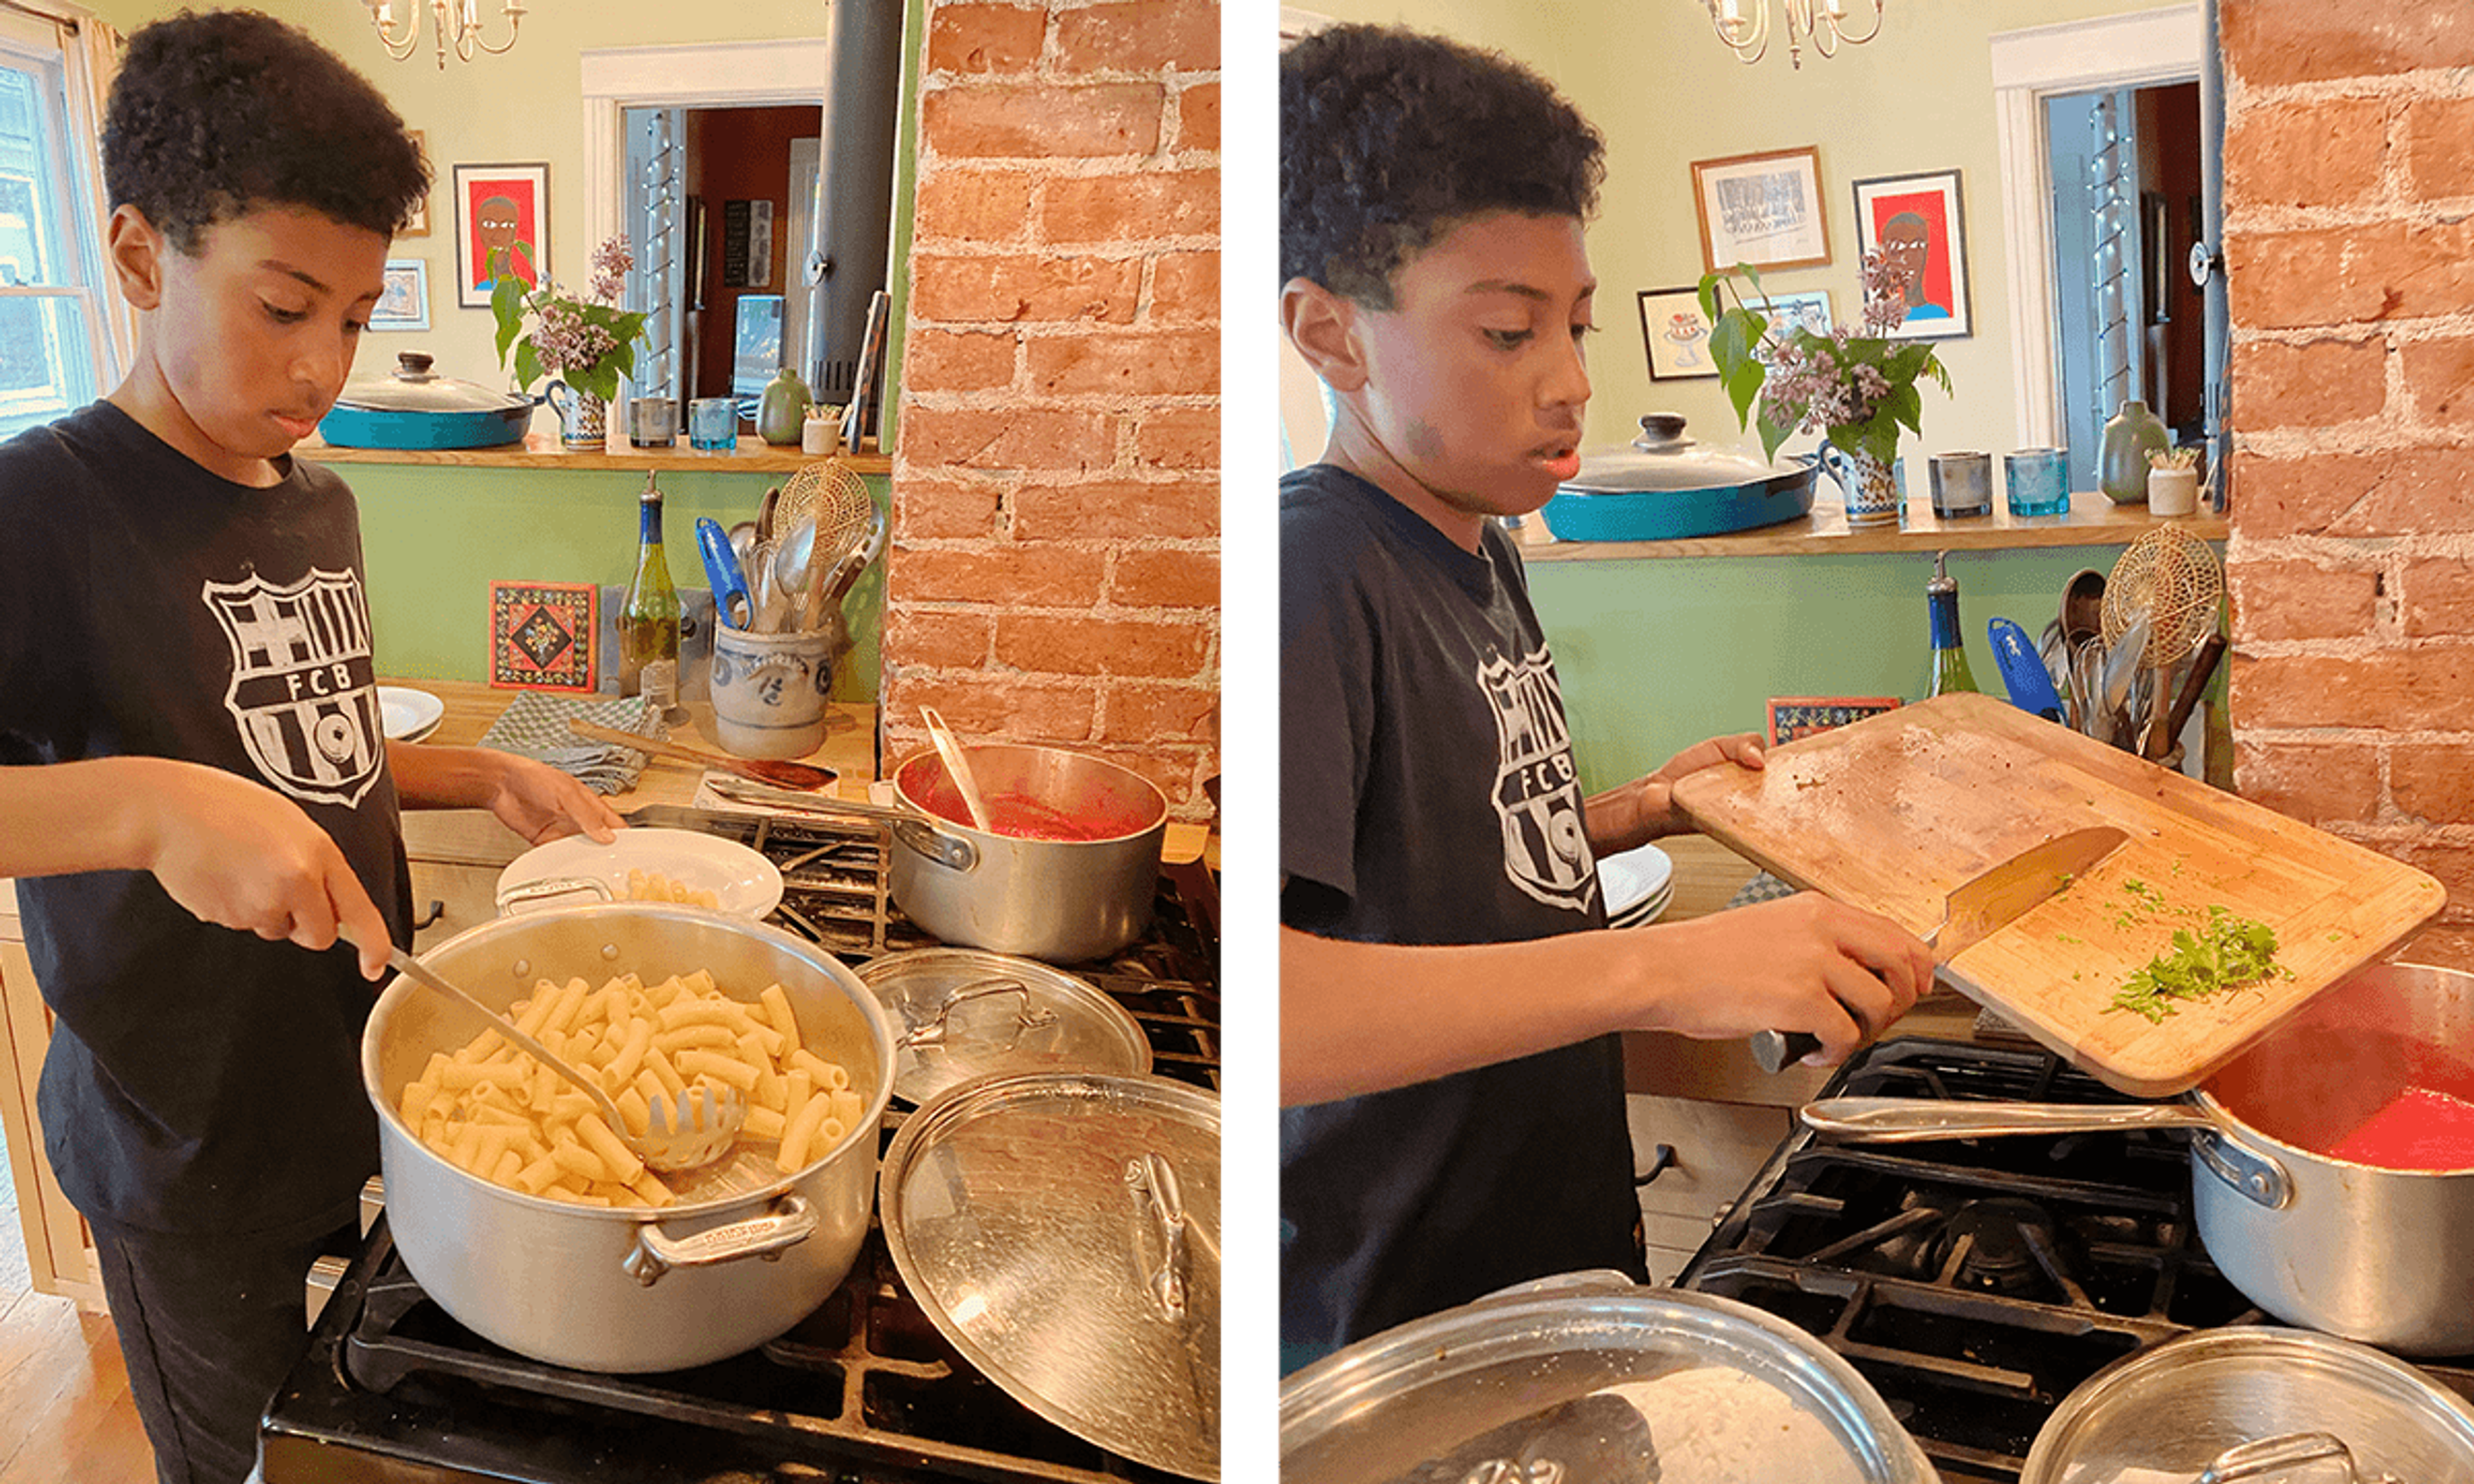 Teenage boy makes pasta over the stove.